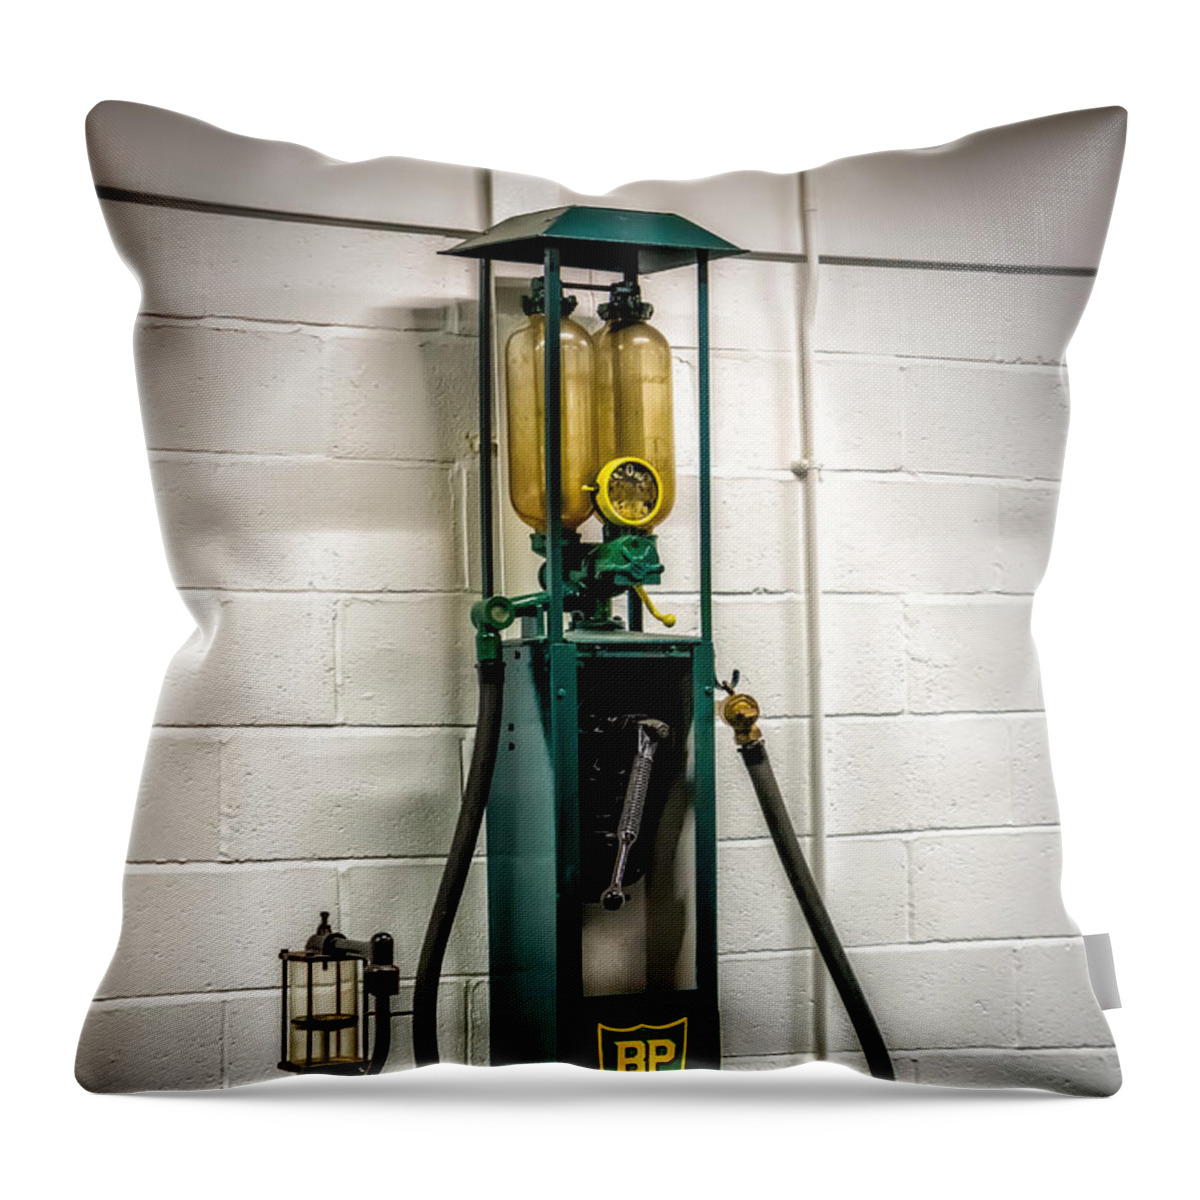 Gas Pumps Throw Pillow featuring the photograph BP Gas Pump by Adrian Evans